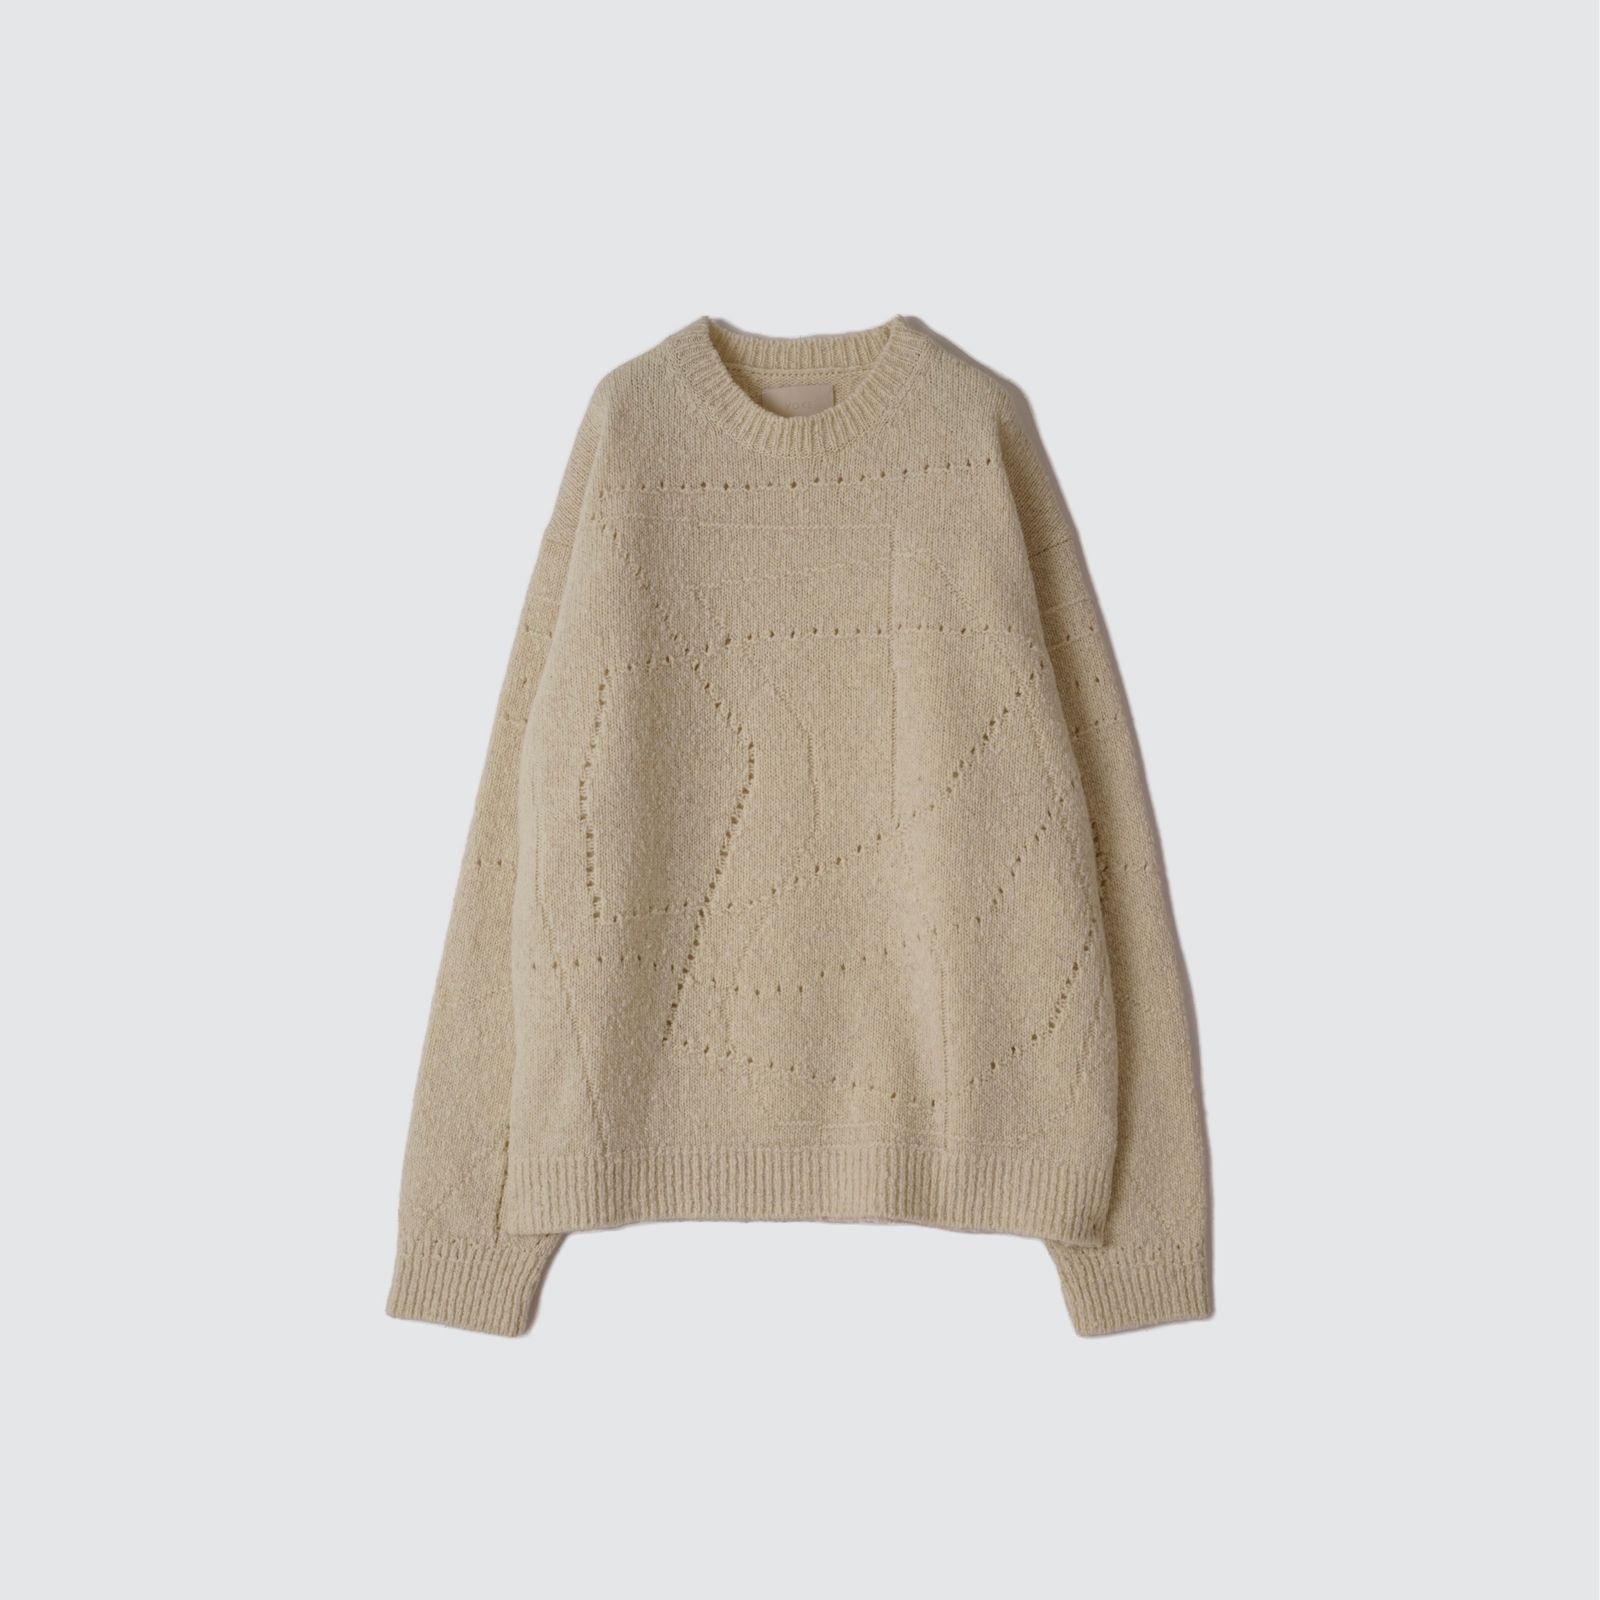 YOKE - 【残りわずか】Continuous Line Sweater | ACRMTSM ONLINE STORE